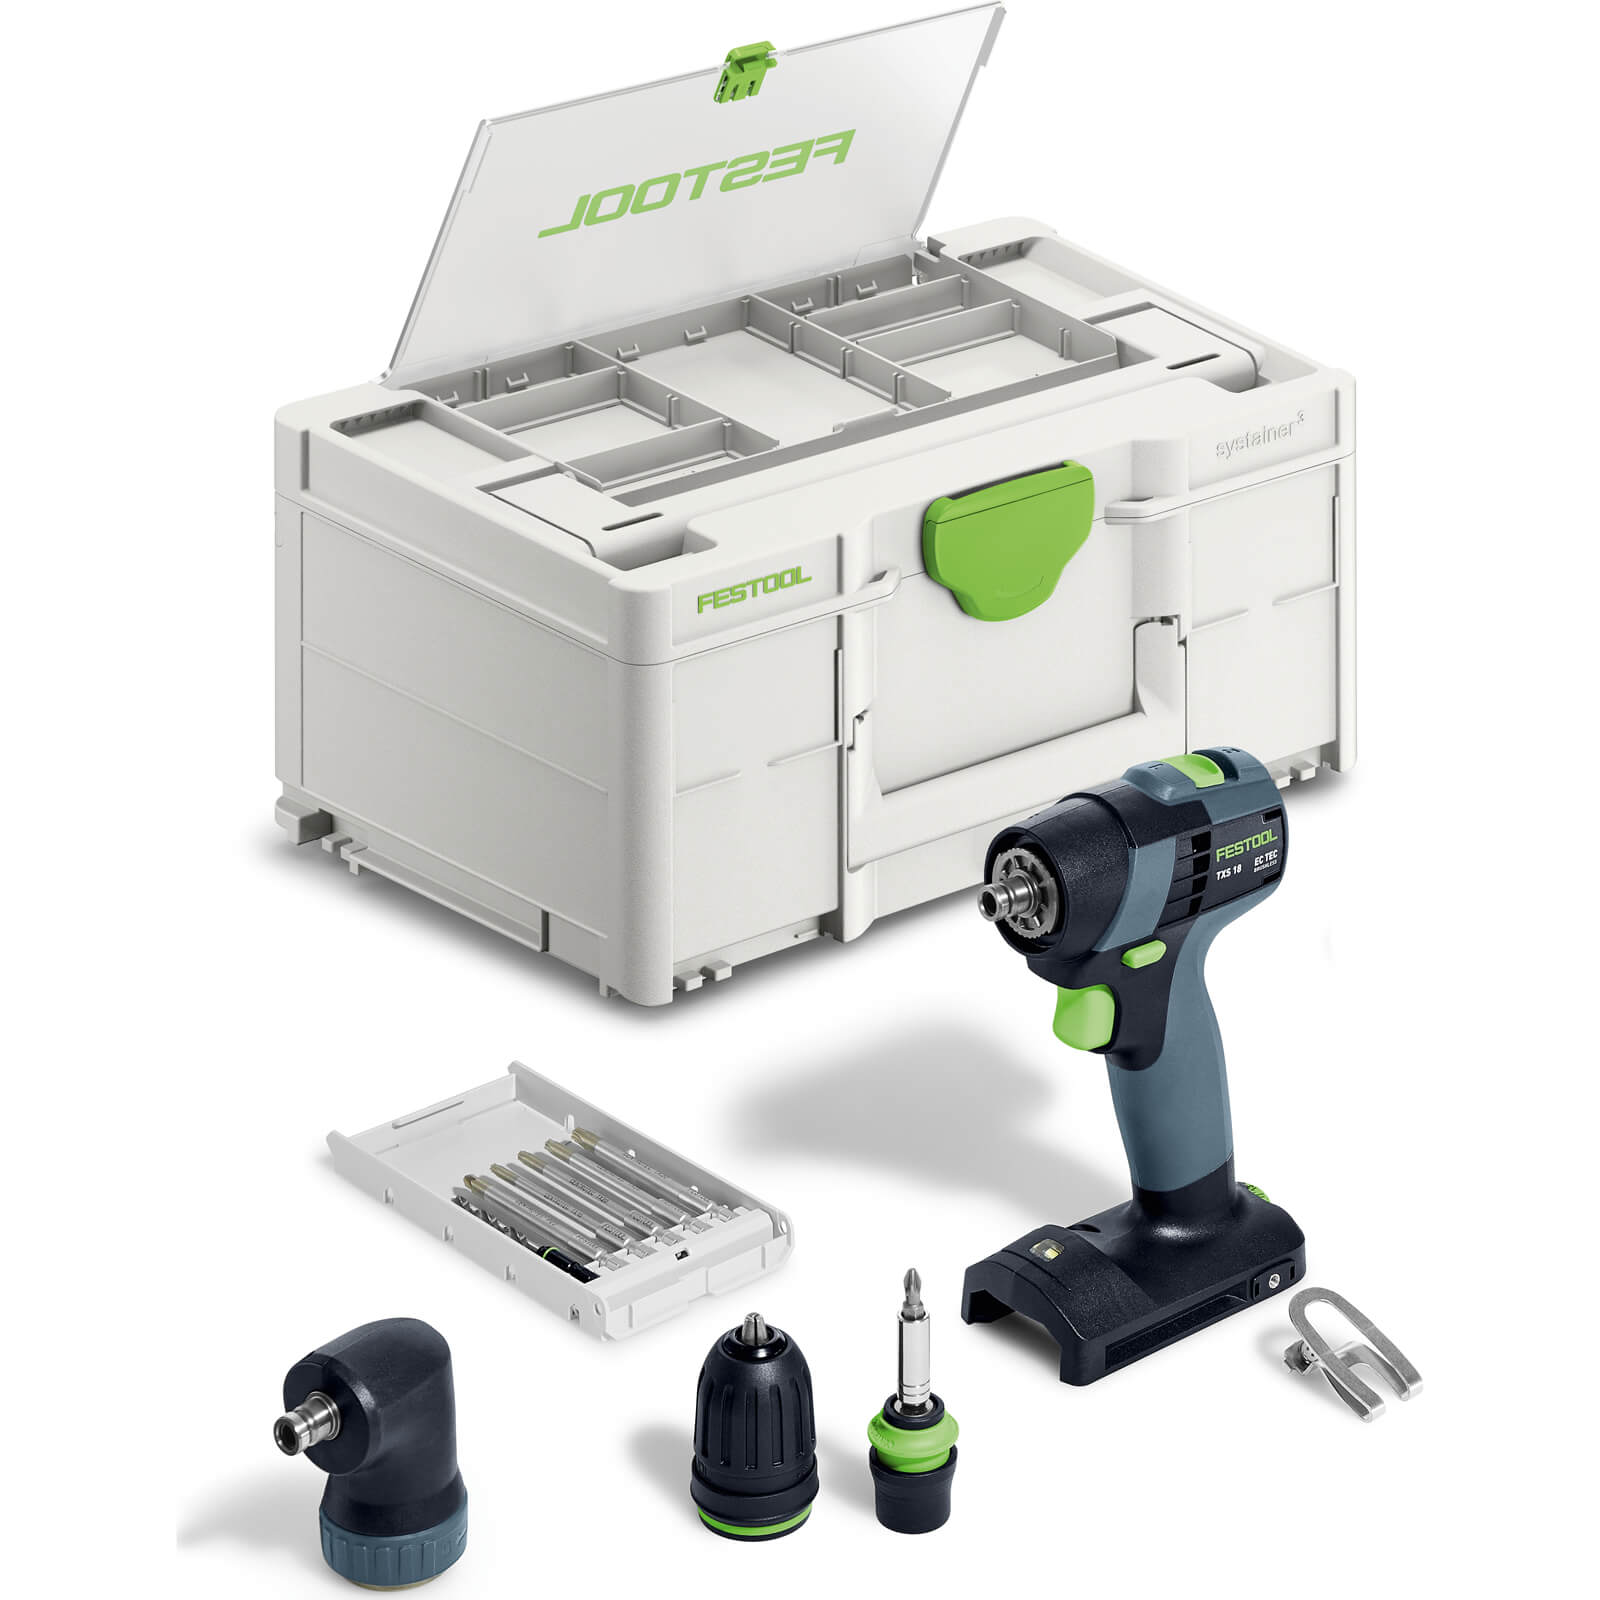 Image of Festool TXS 18 18v Cordless Brushless Drill Driver Set No Batteries No Charger Case